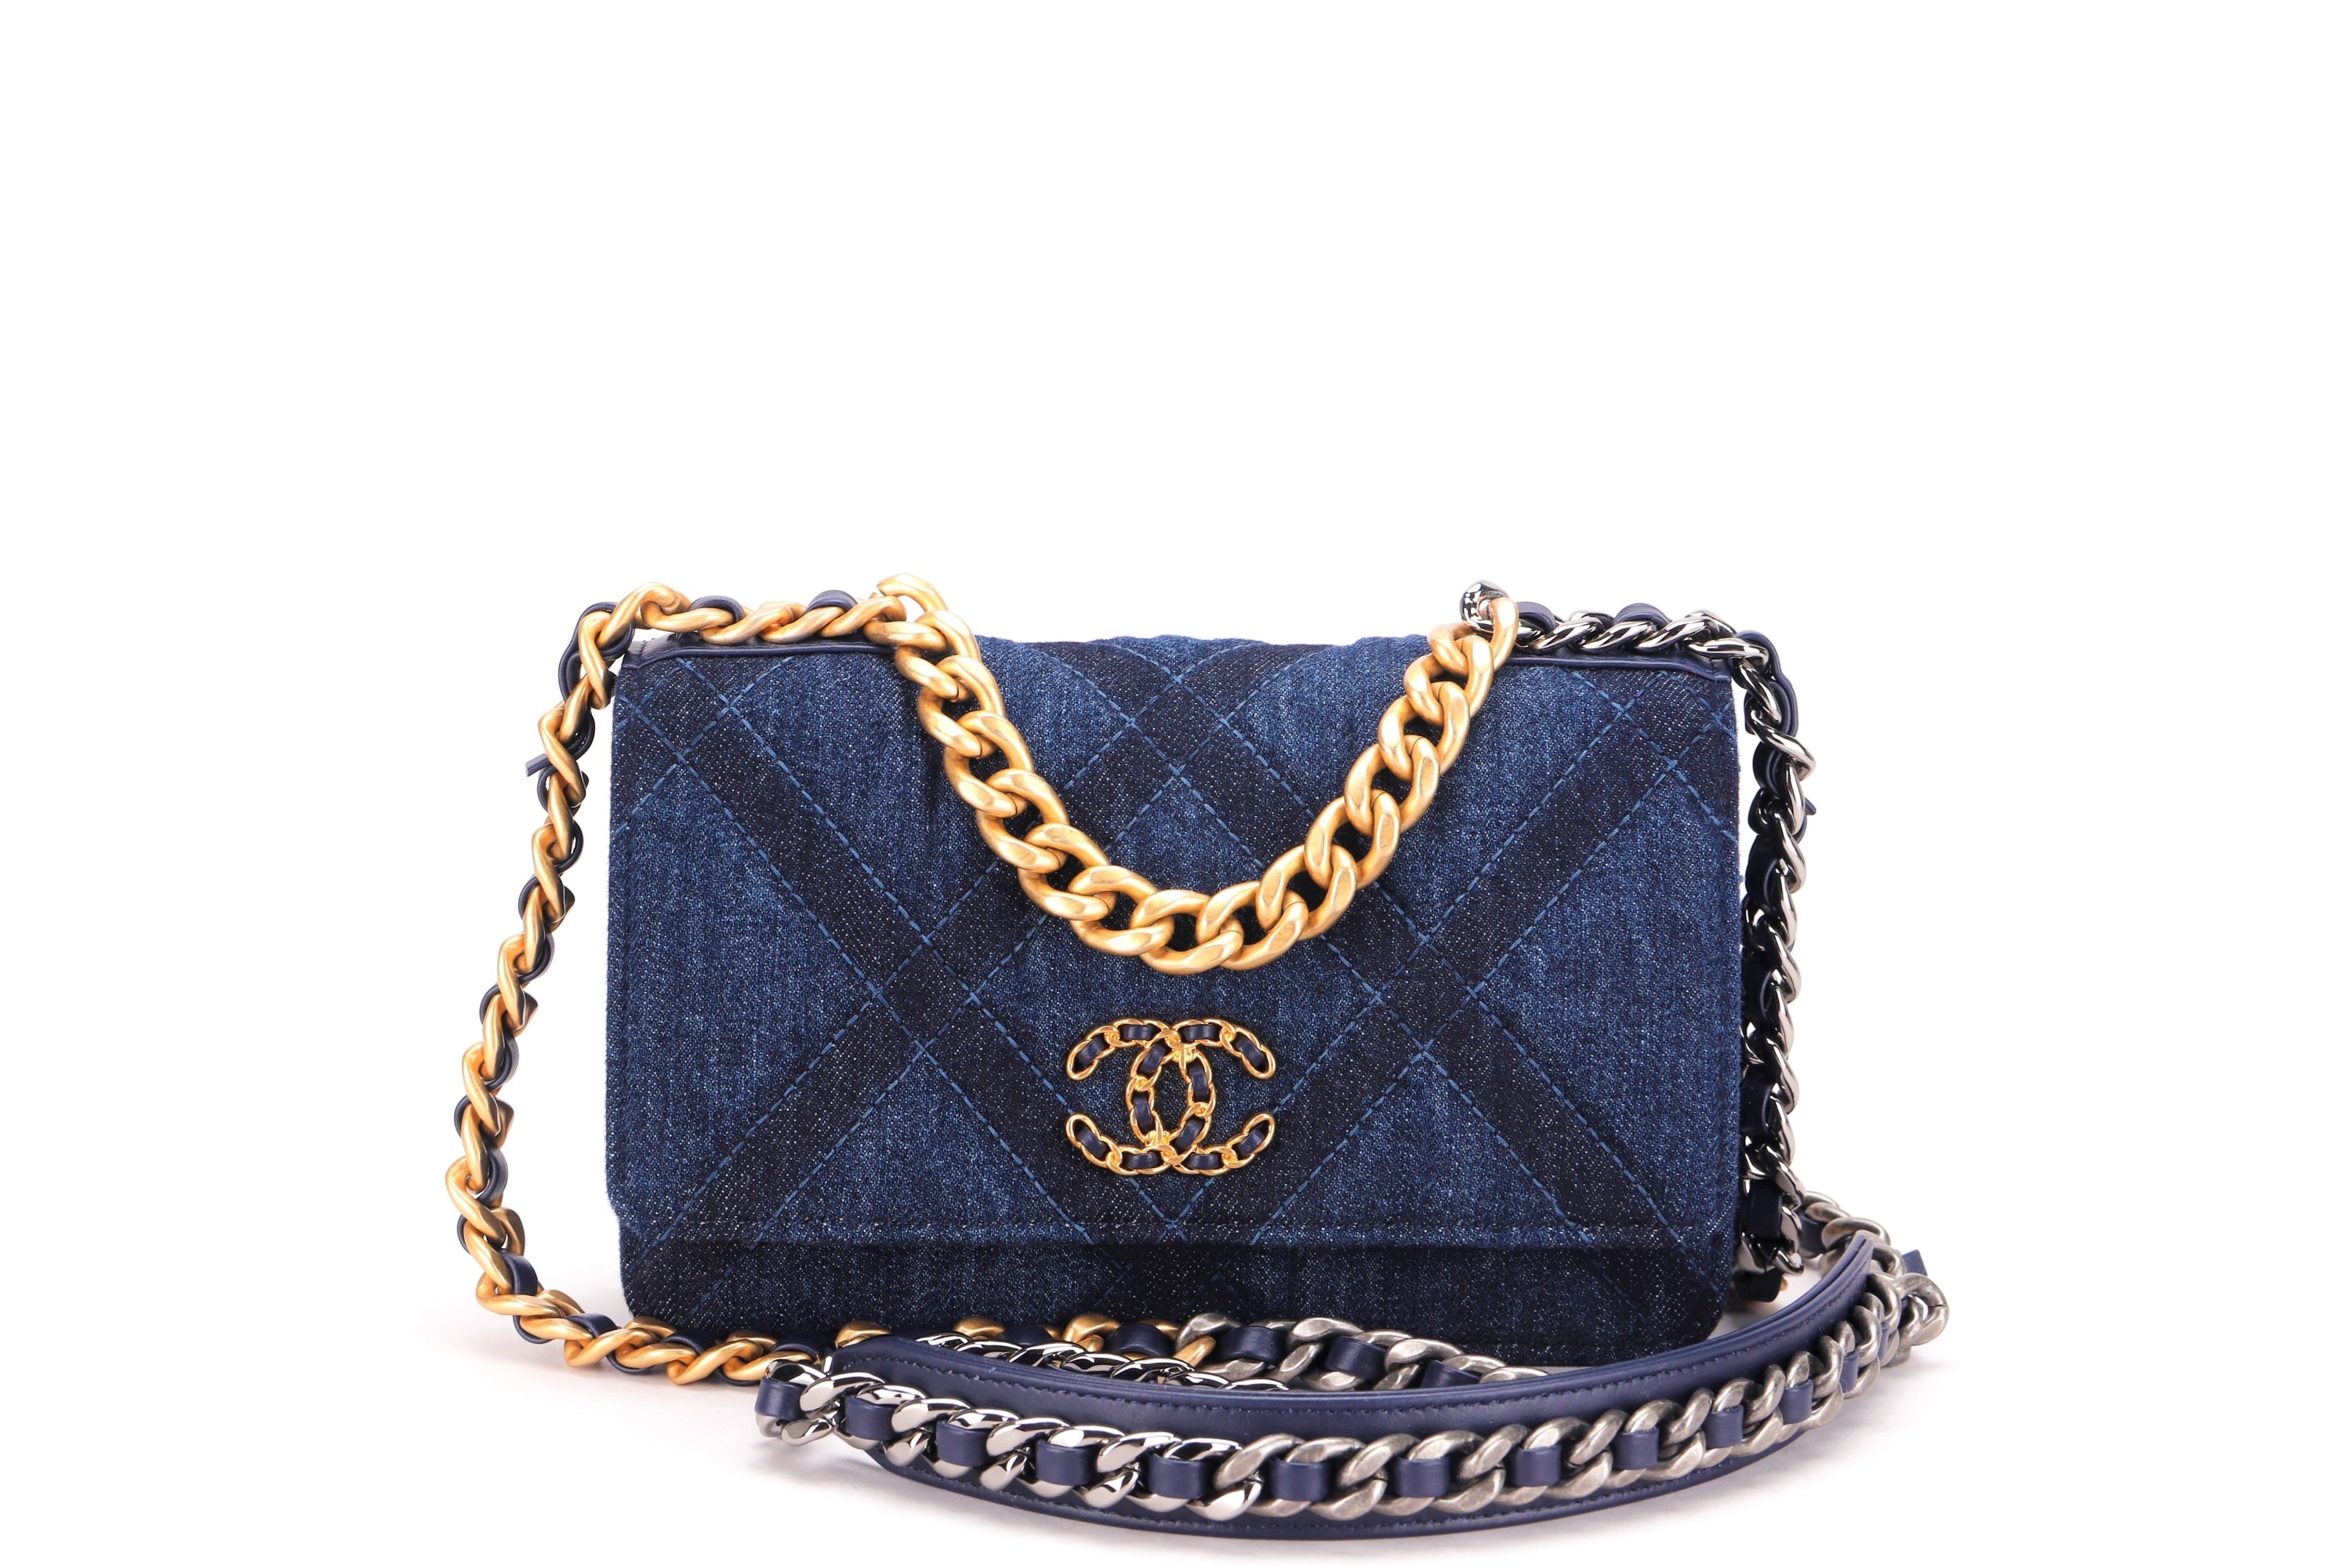 CHANEL 19 BLUE DENIM WALLET ON CHAIN (JX7Txxxx), WITH DUST COVER